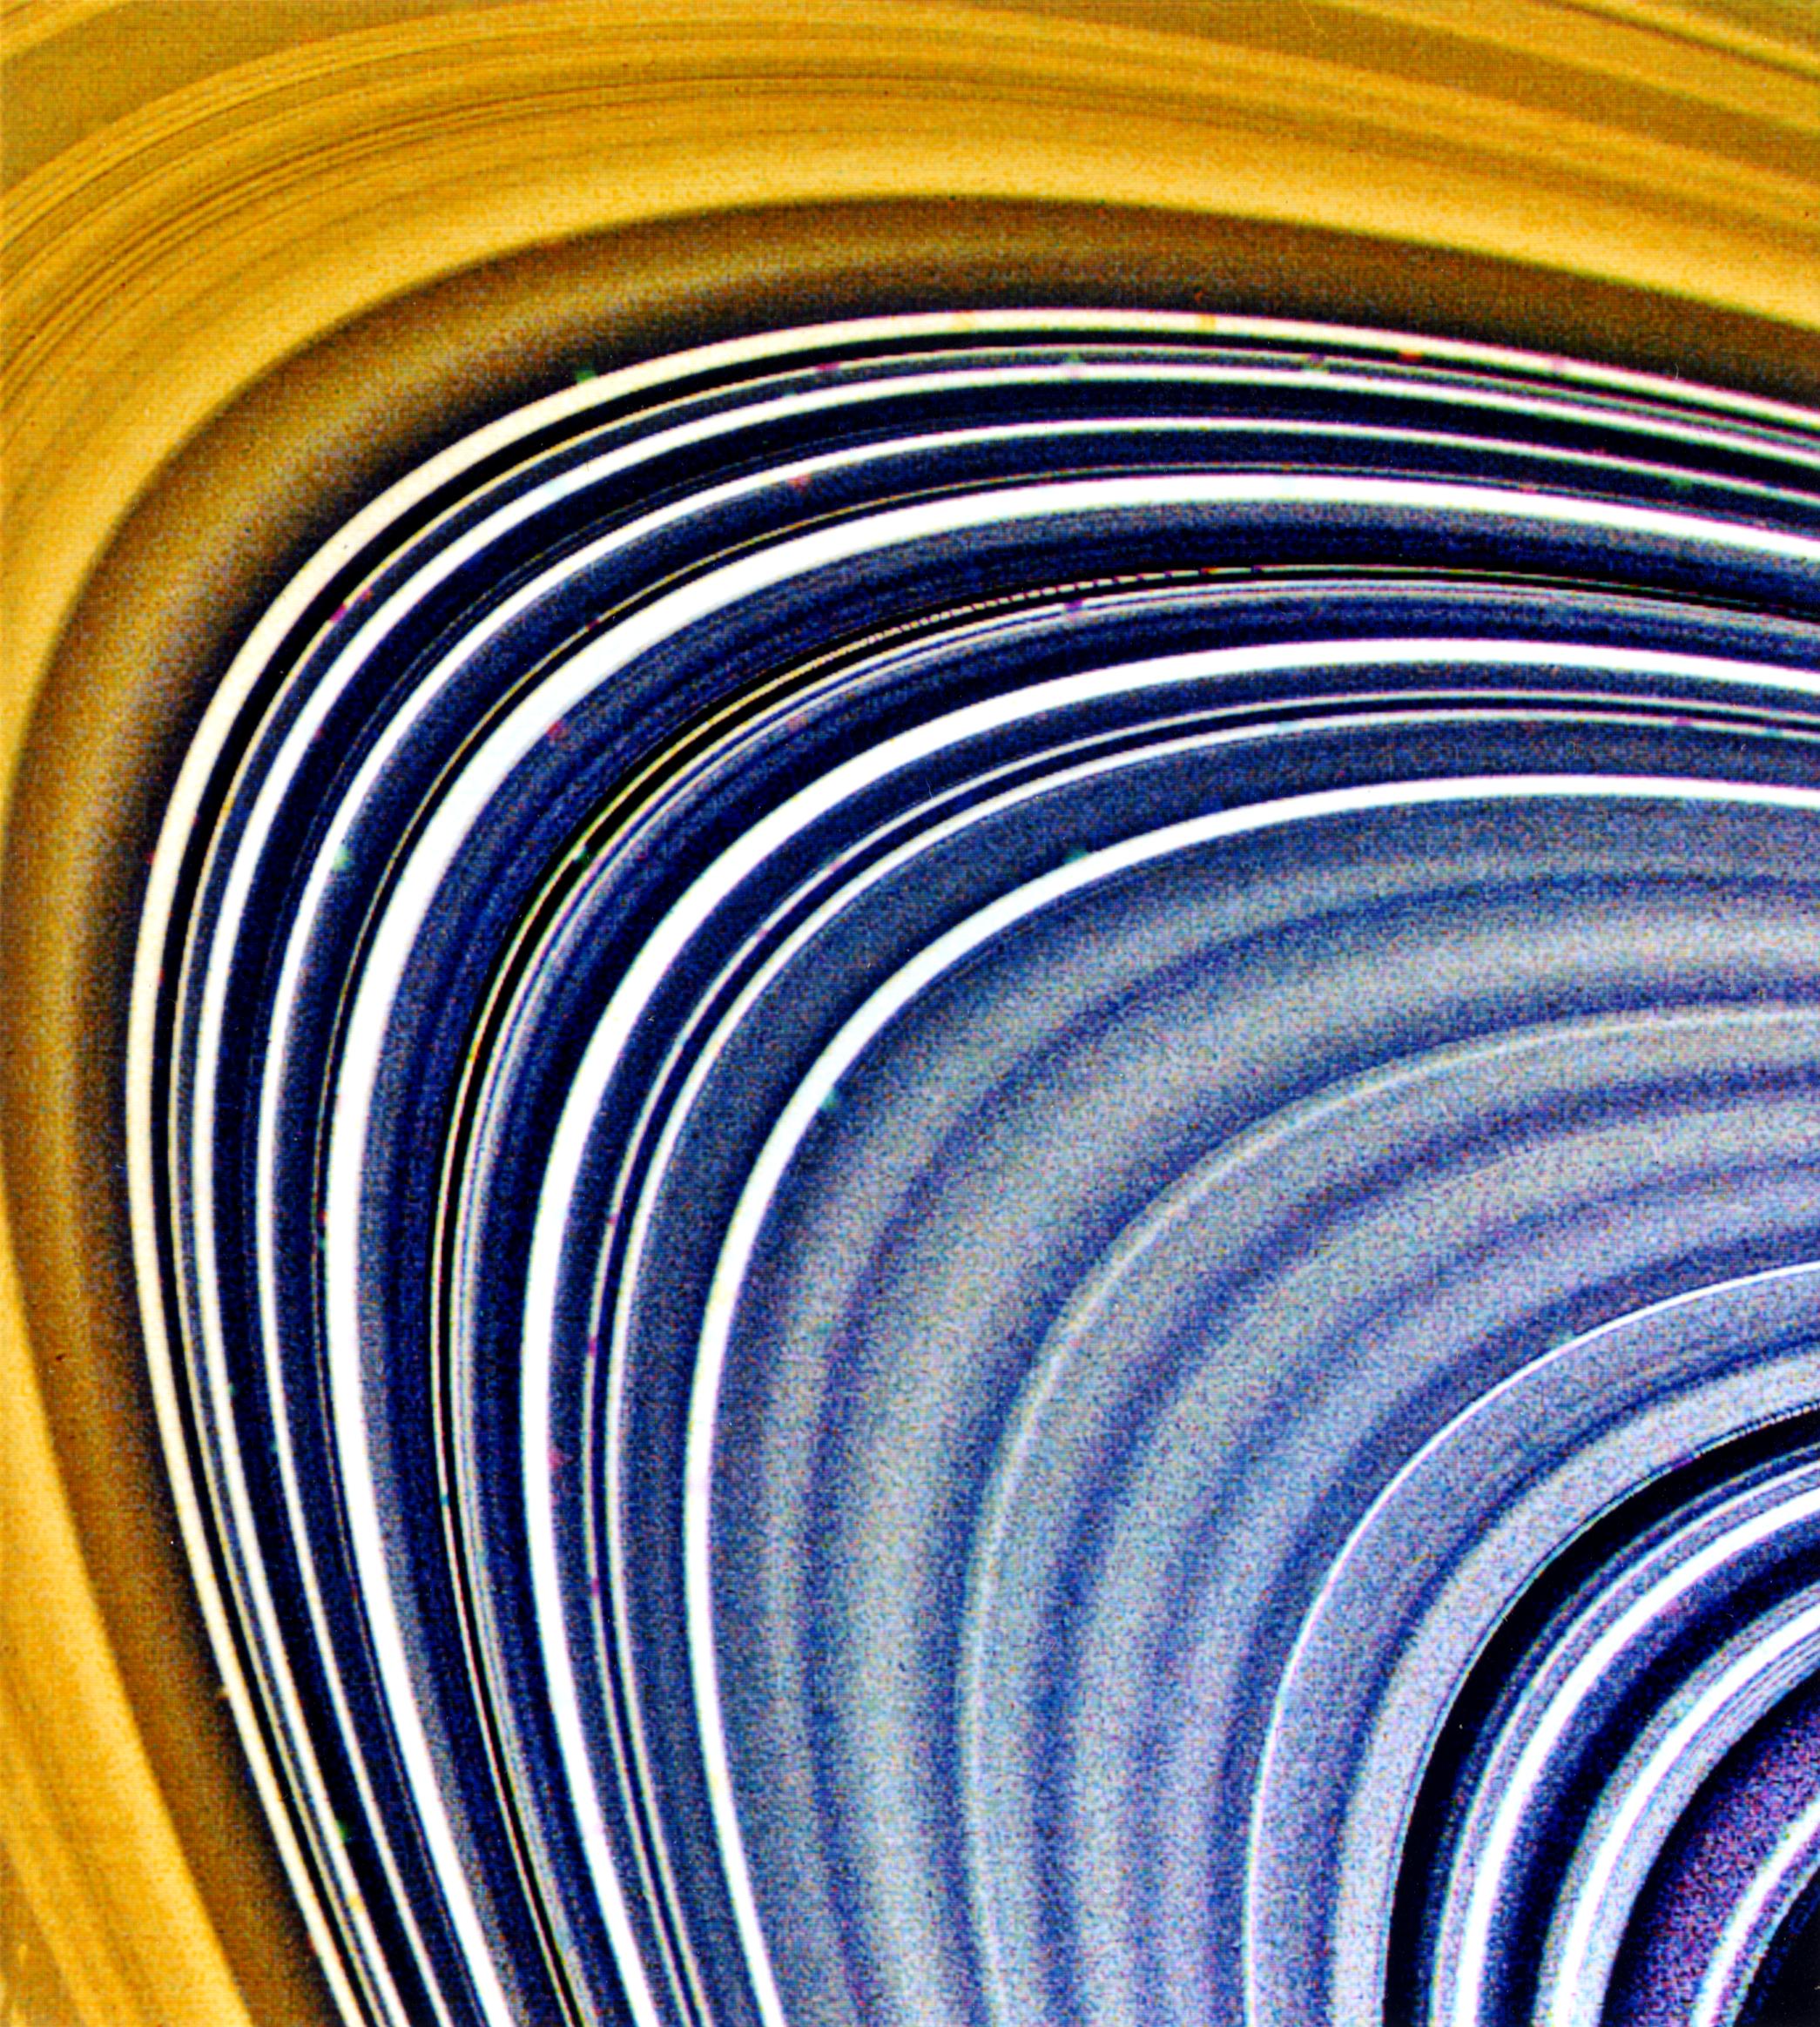 Dozens of tight, concentric rings fill this close up of Saturn's rings.